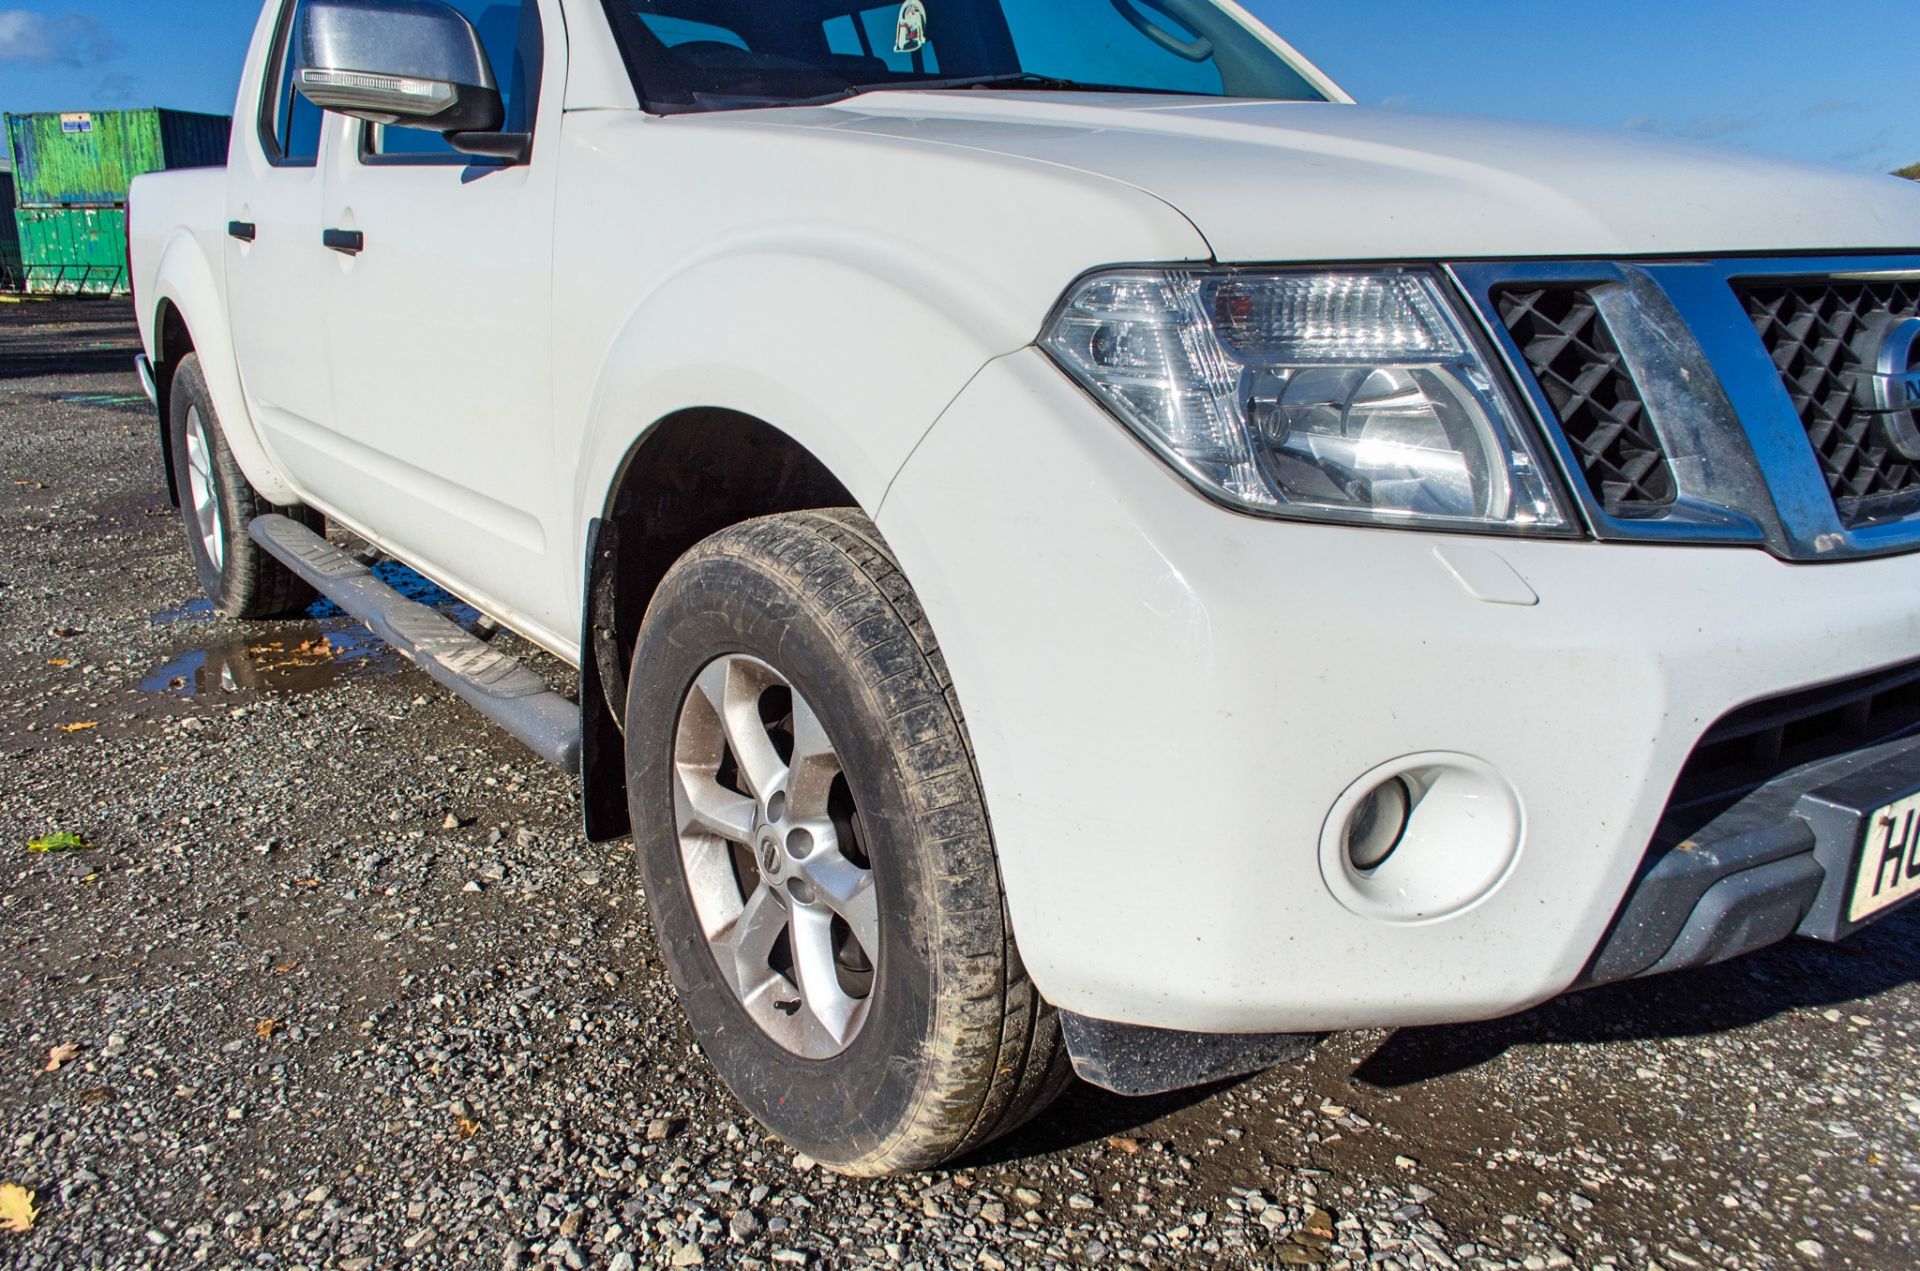 Nissan Navara Tekna DCi 2.5 diesel auto double cab pick up Registration Number: HG63 SZP Date of - Image 9 of 30